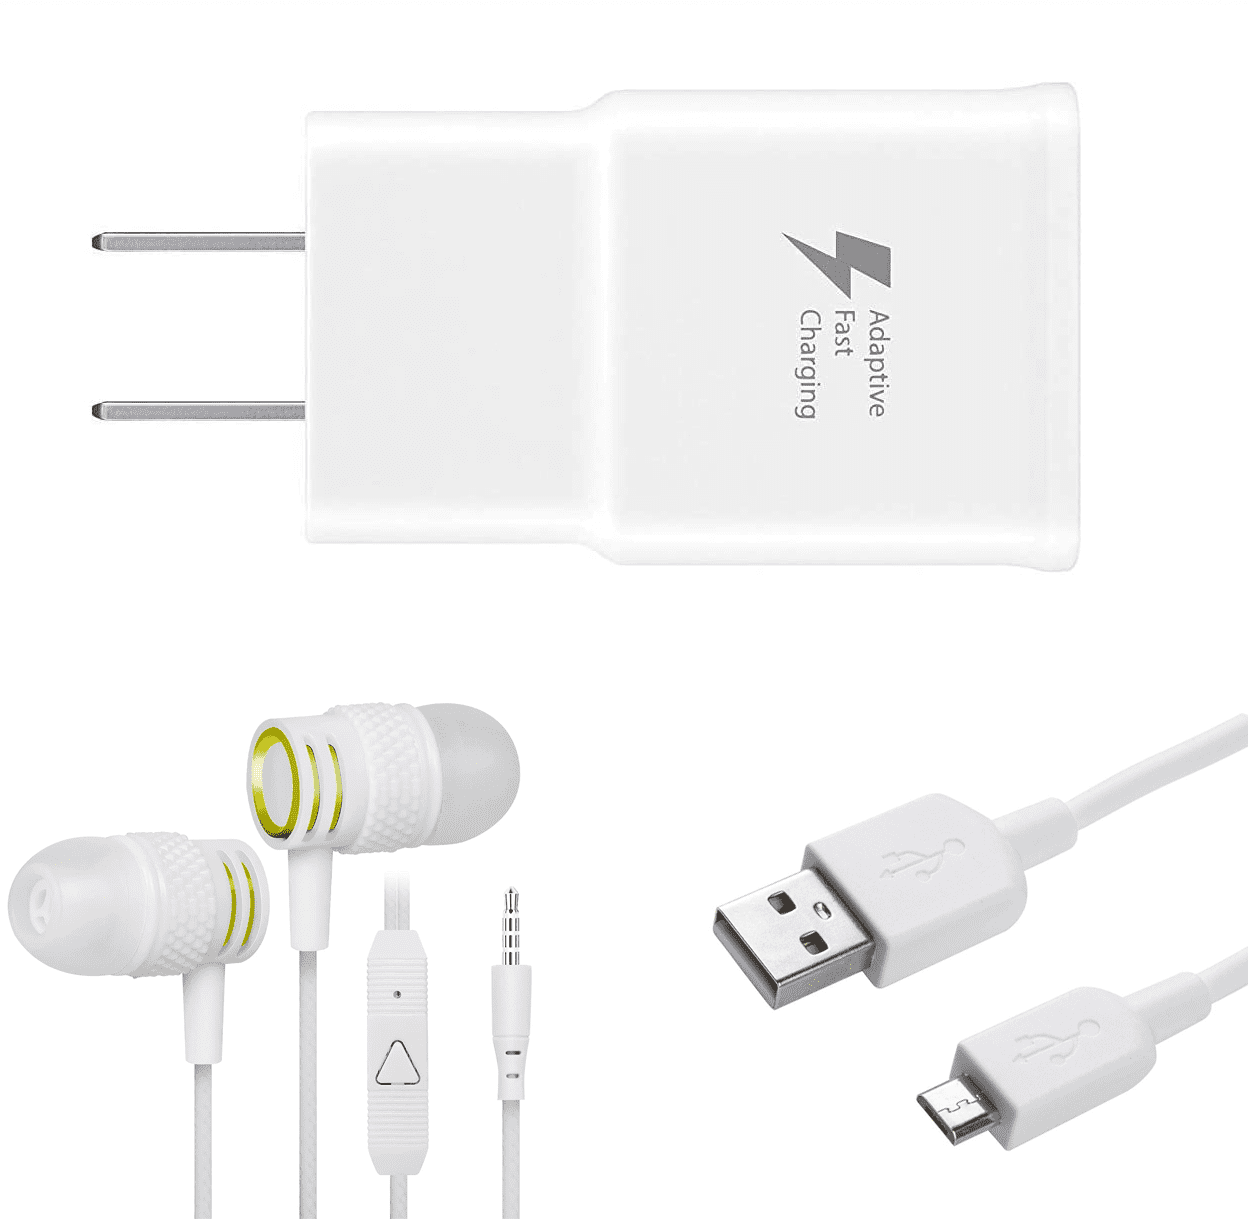 manuskript Kosciuszko Se insekter OEM EP-TA20JBEUGUS Inbox Replacement 15W Adaptive Fast Wall Charger for  Xiaomi Redmi Note 4X Includes Fast Charging 10FT Micro USB Charging Cable,  and 3.5mm Earphone with Mic – 3 Items Bundle -